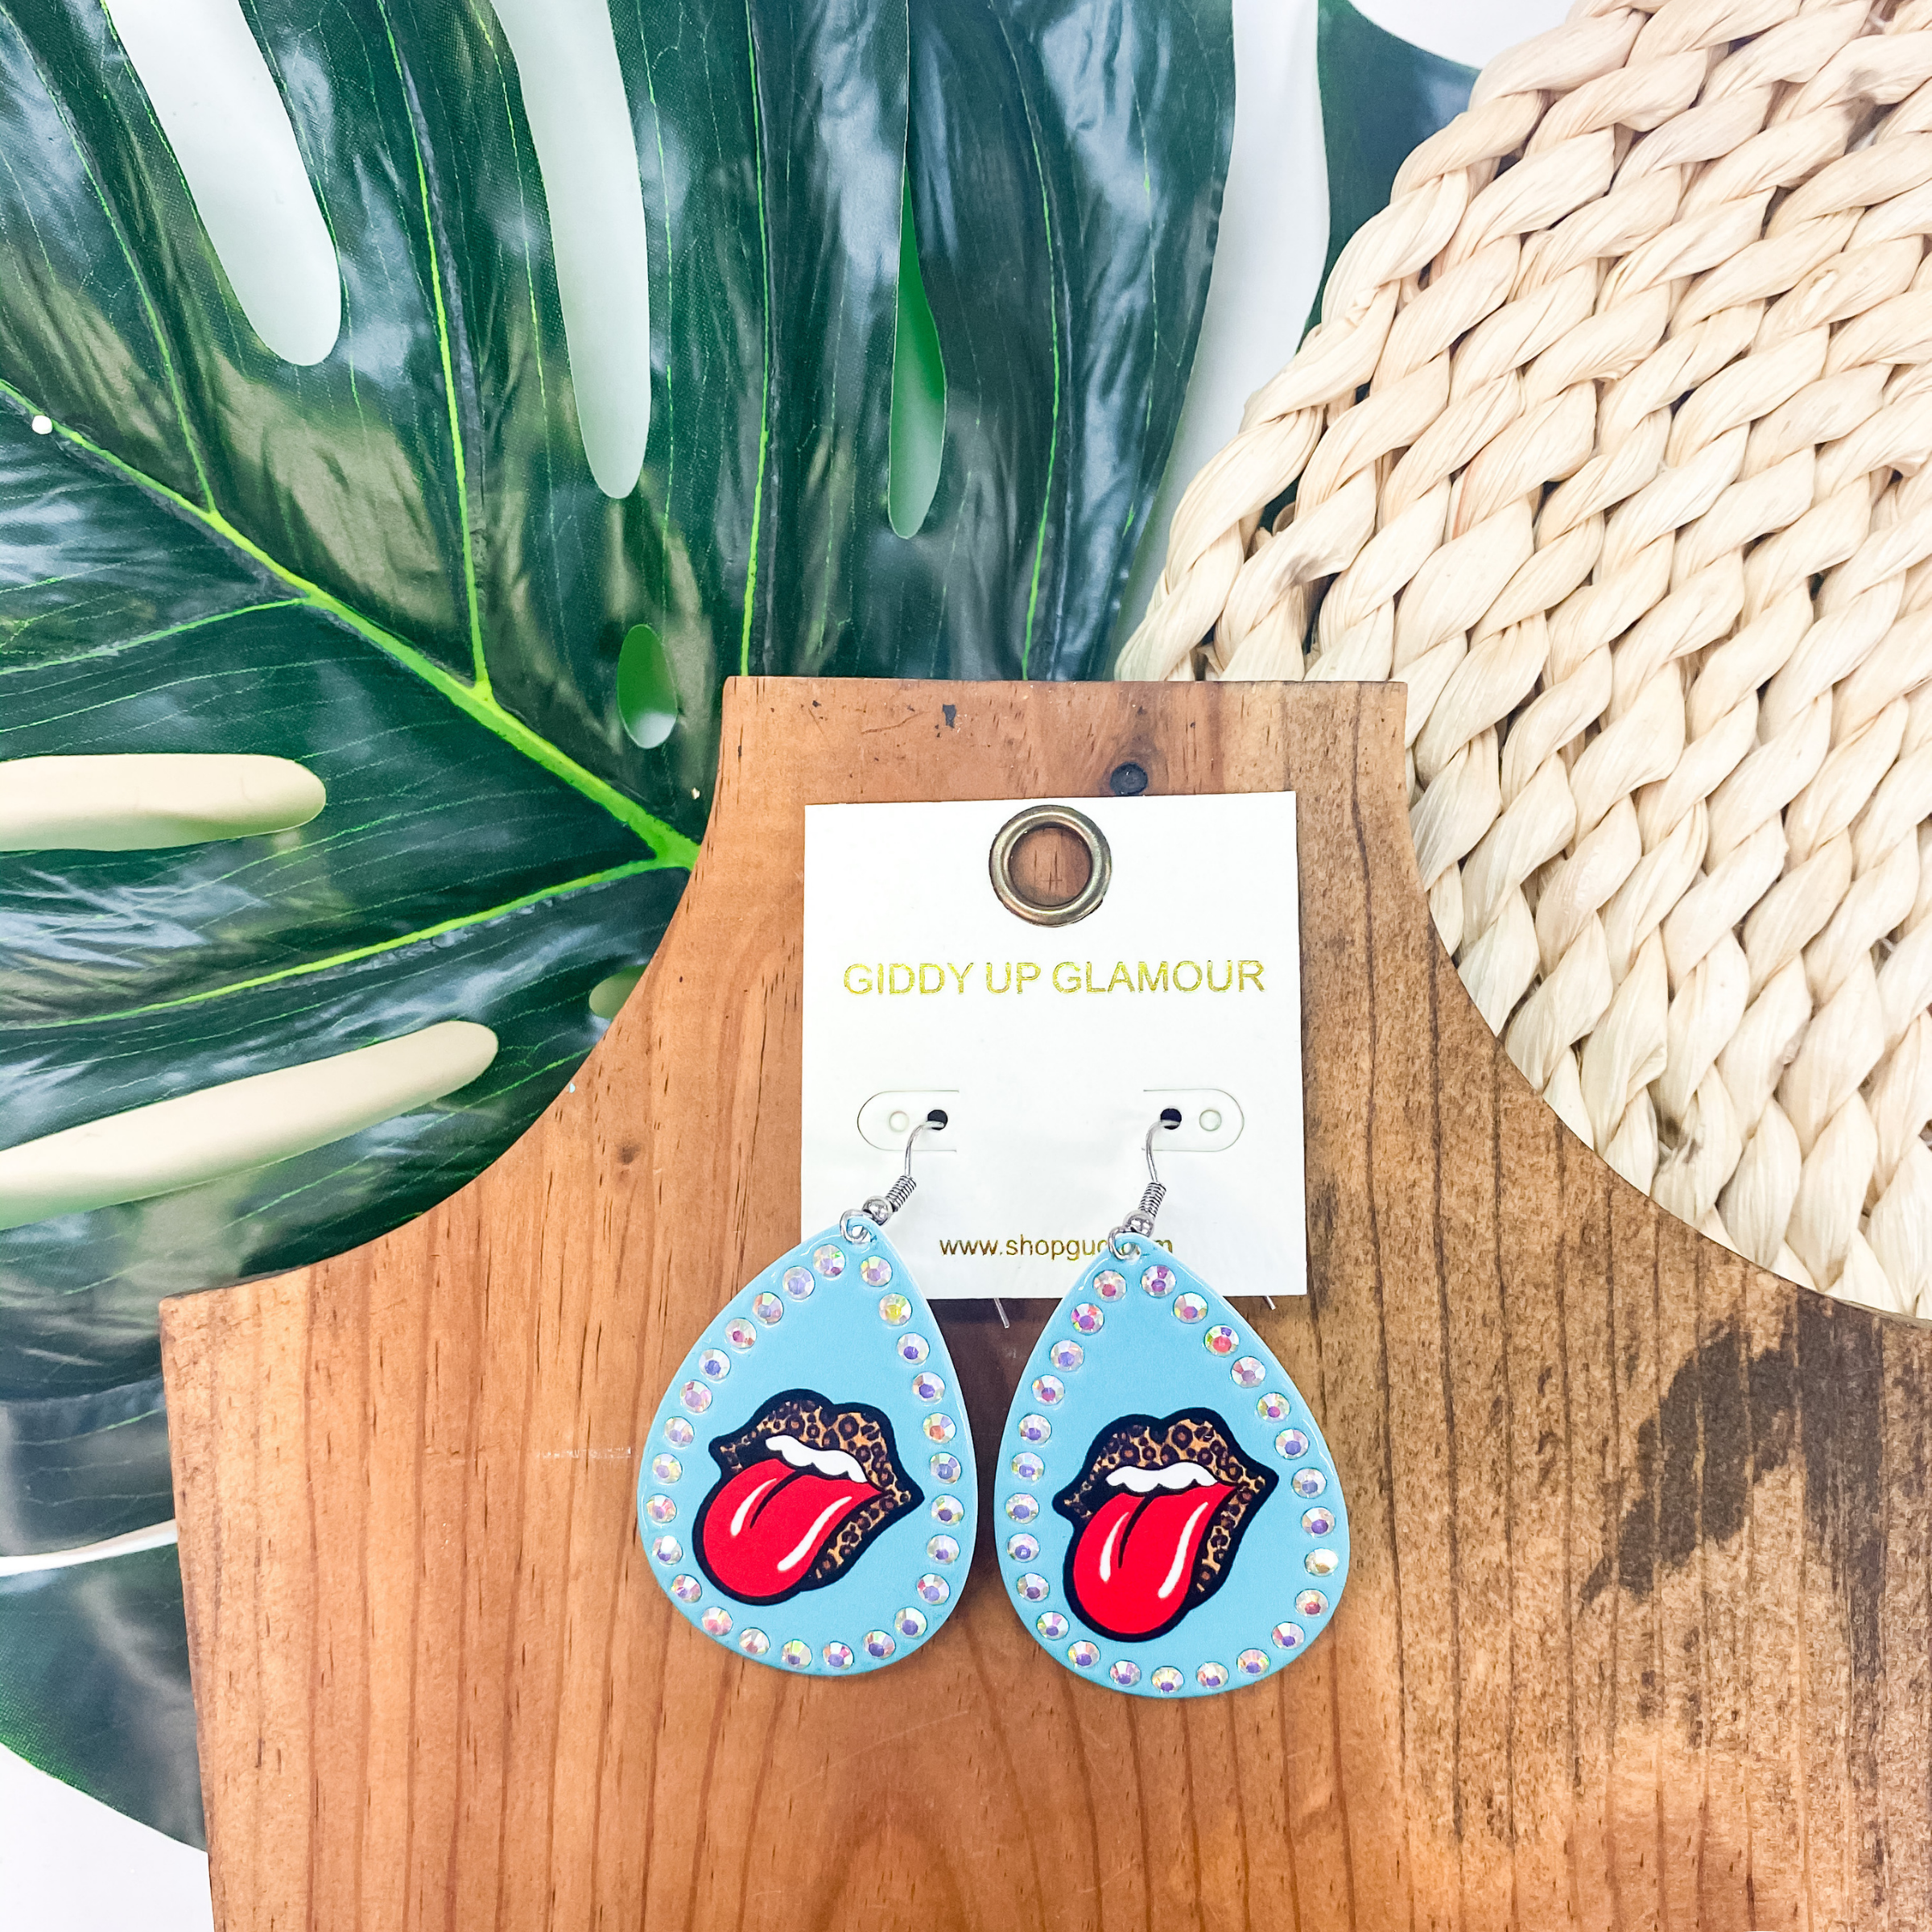 Rock On Metal Teardrop Earrings With Leopard Print In Turquoise - Giddy Up Glamour Boutique